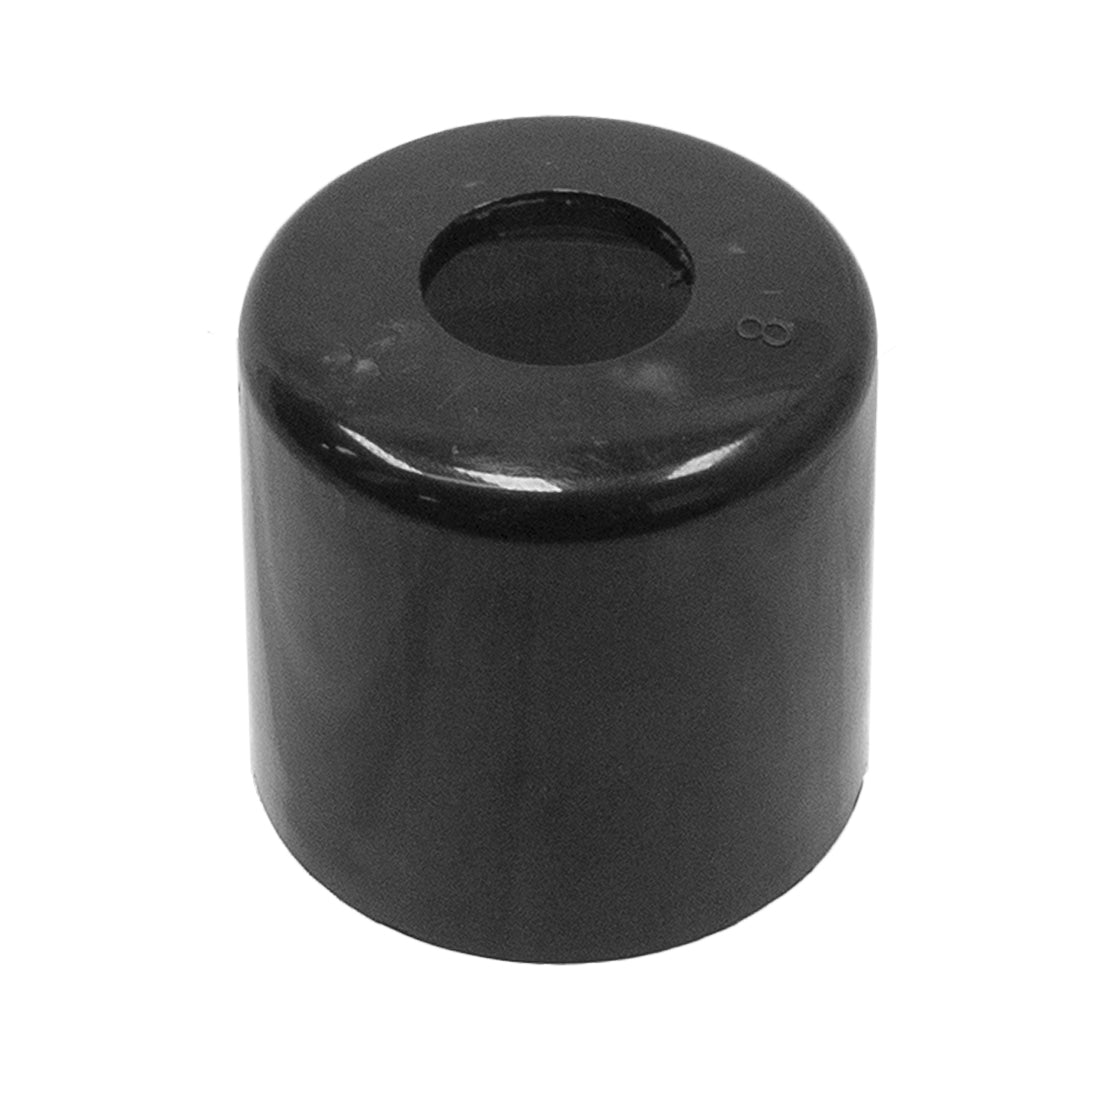 XERO Base Cap - For Pro and Micro Series Top View